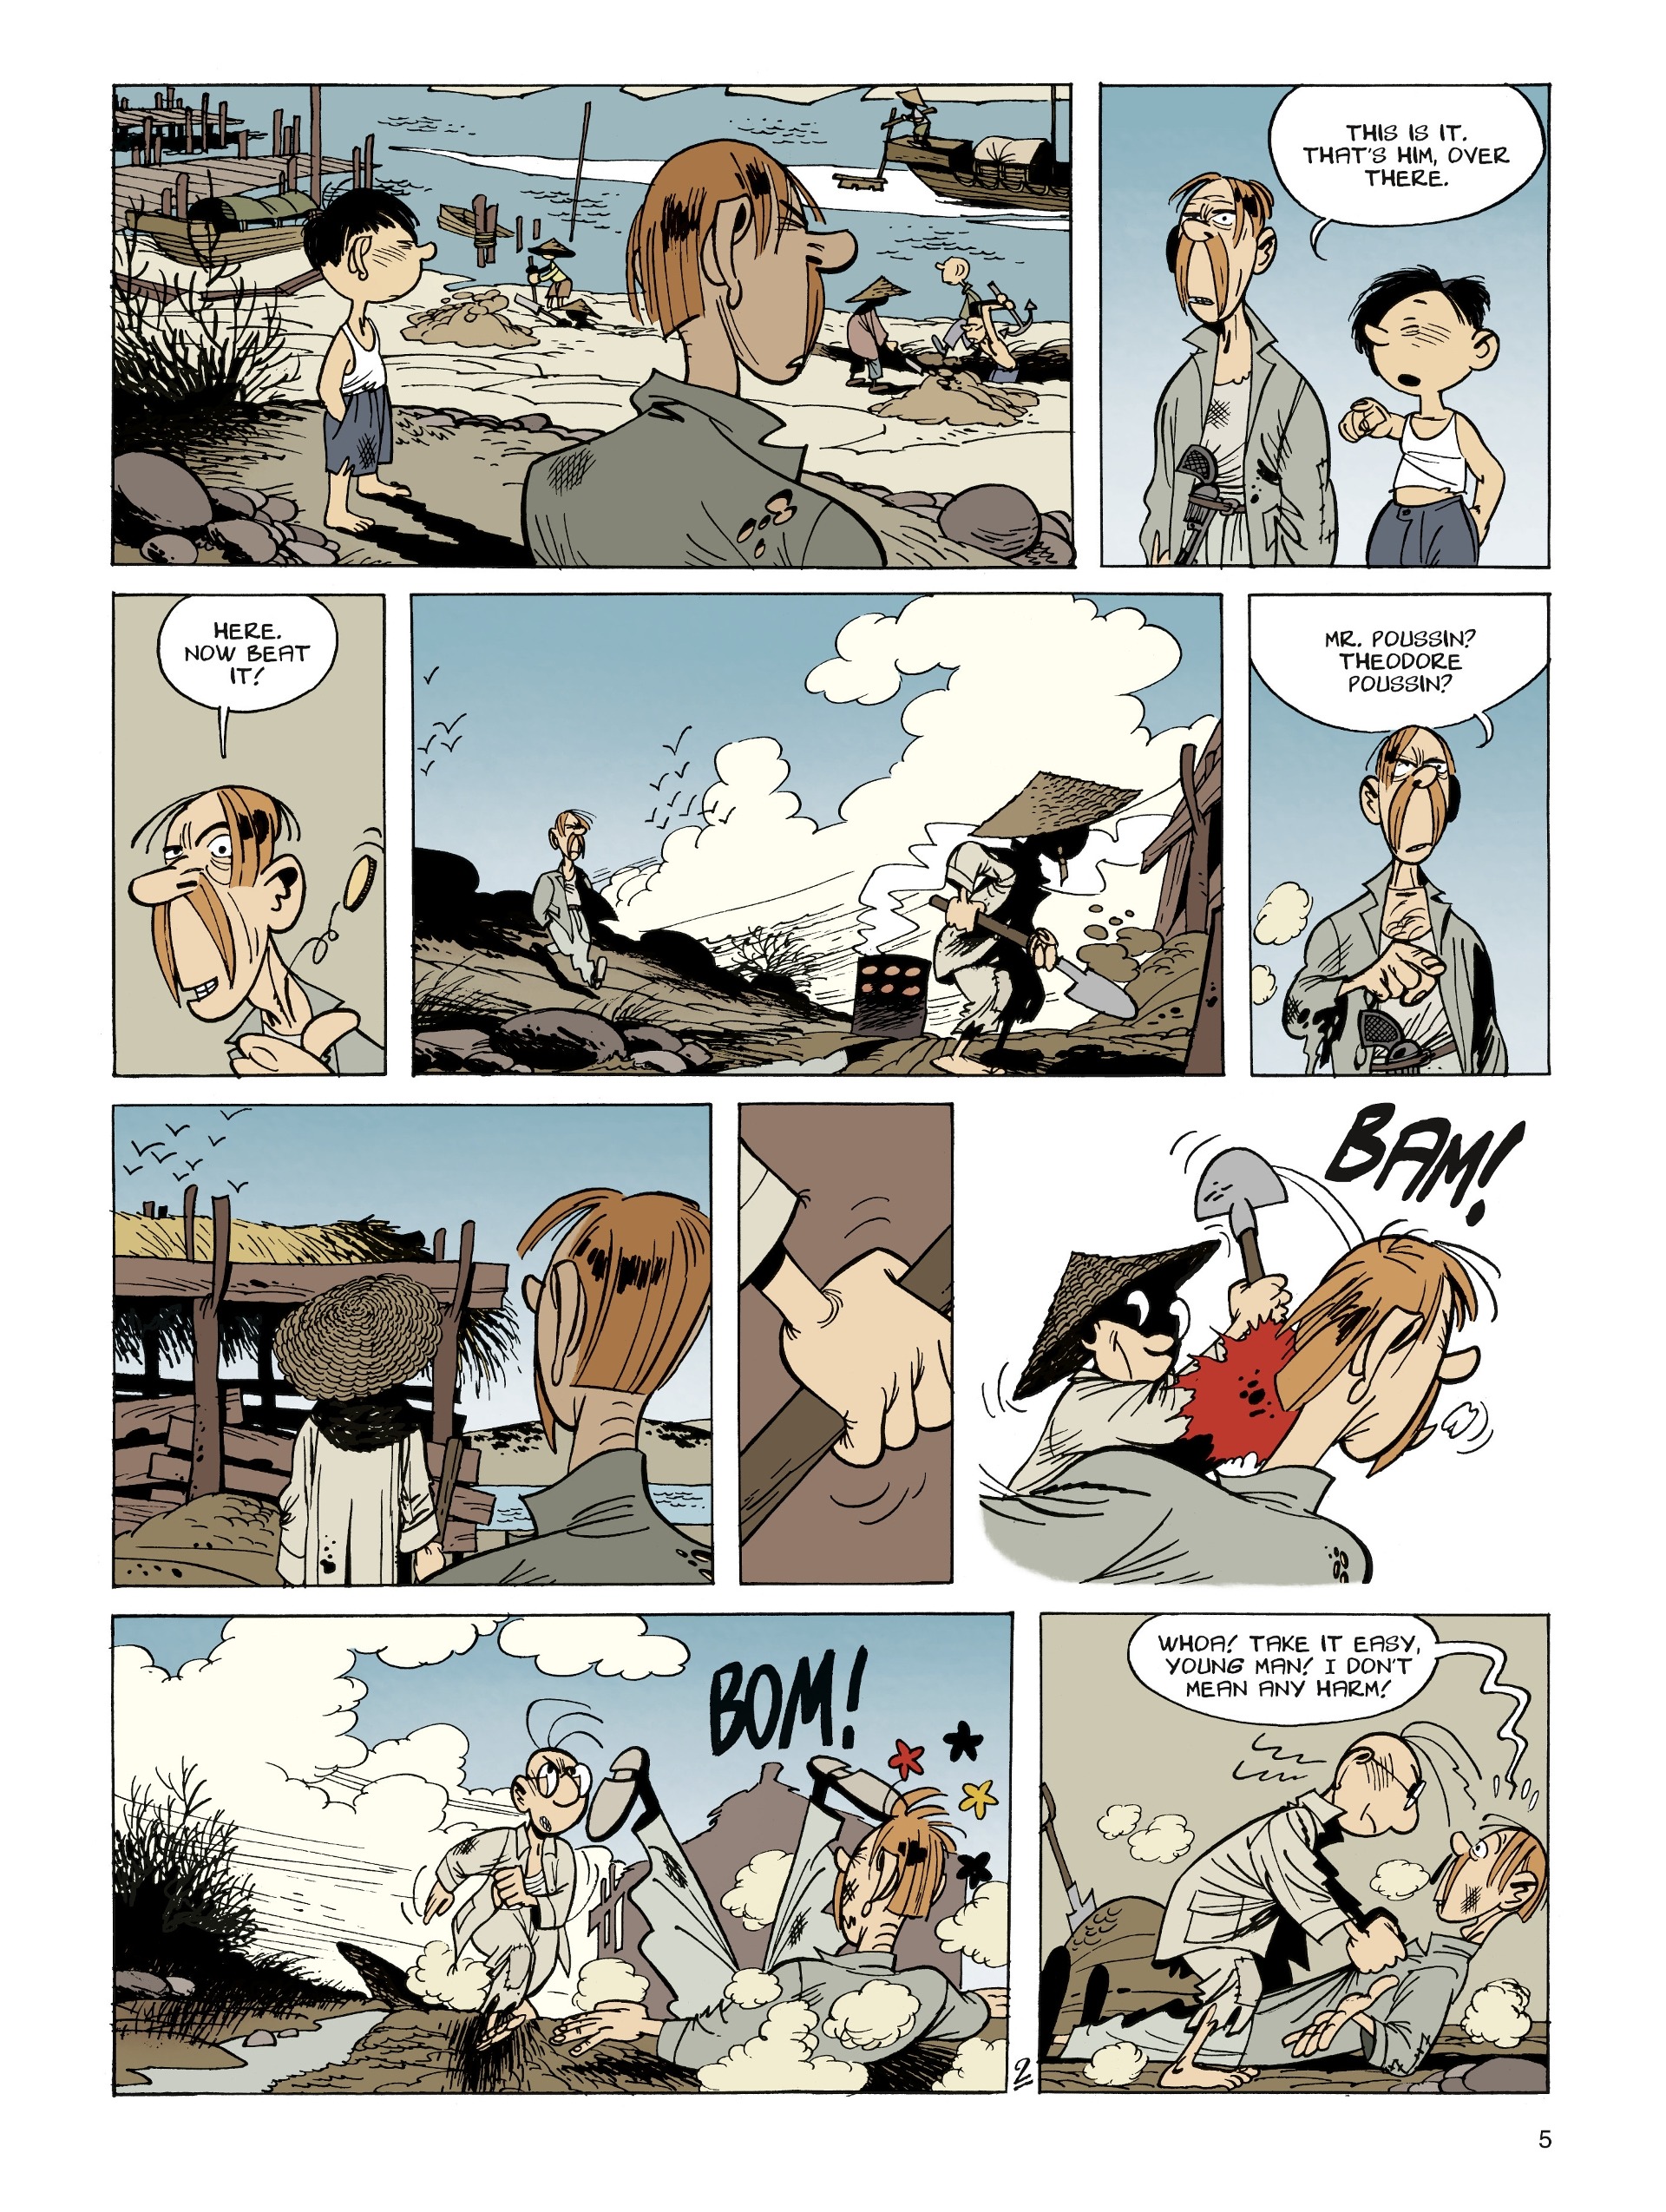 Read online Theodore Poussin comic -  Issue #2 - 5